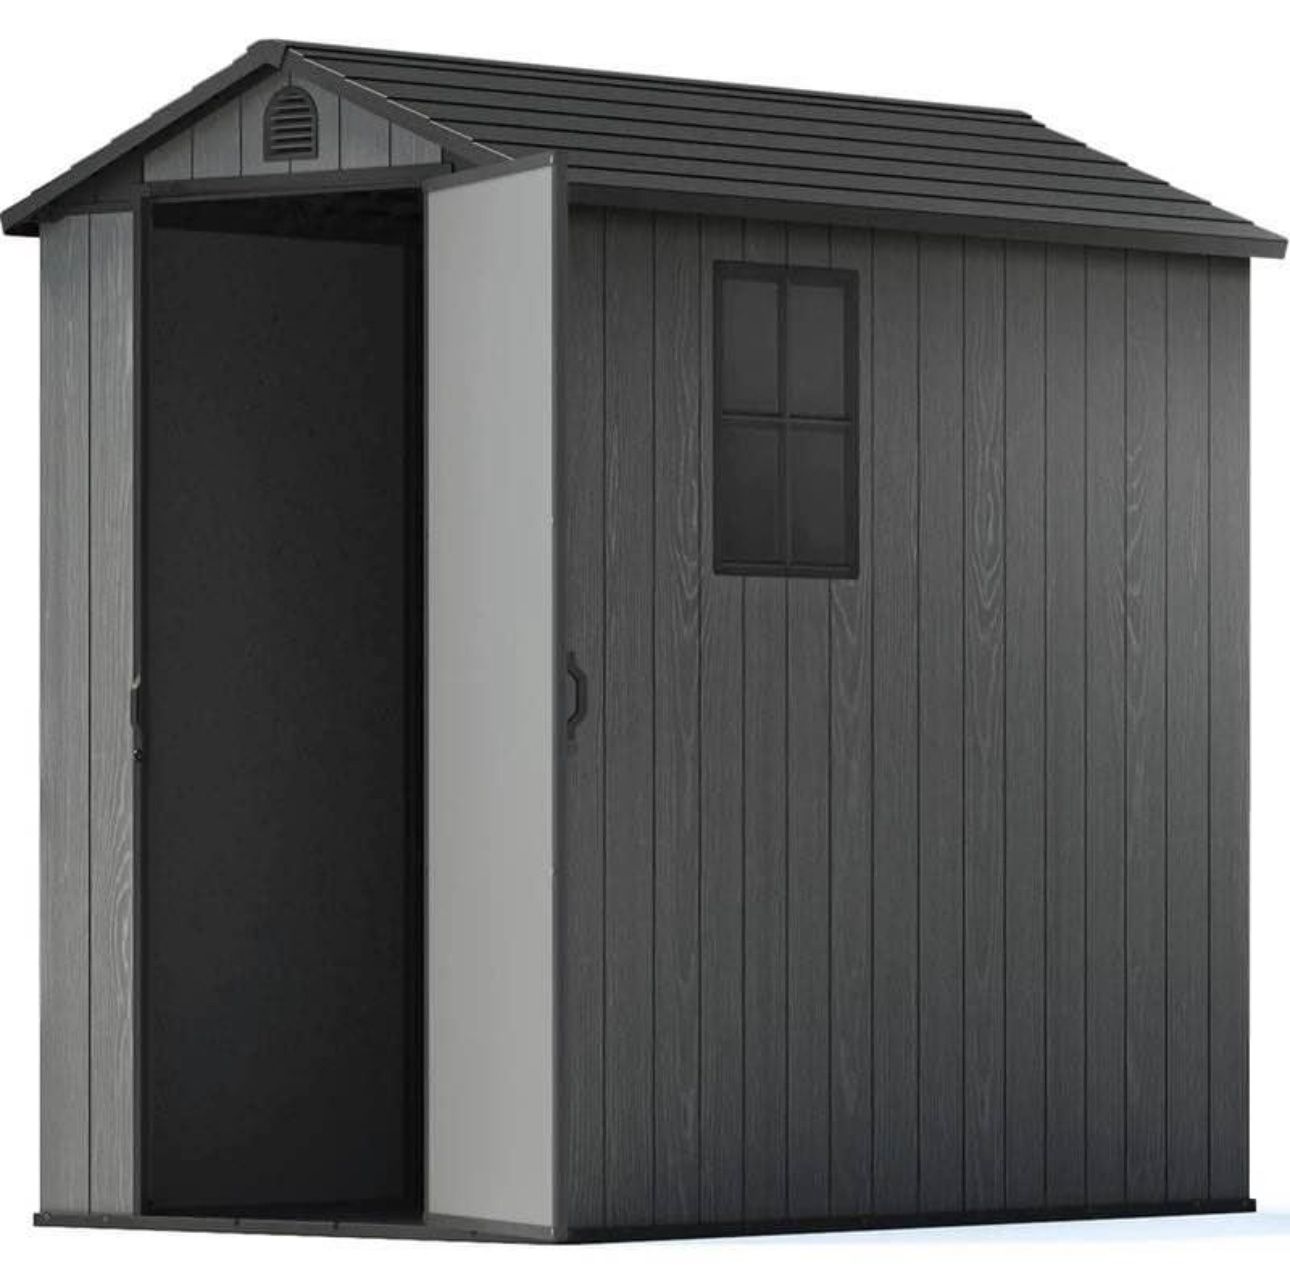 Patiowell 4x6 Plastic Storage Shed Pro（with floor)